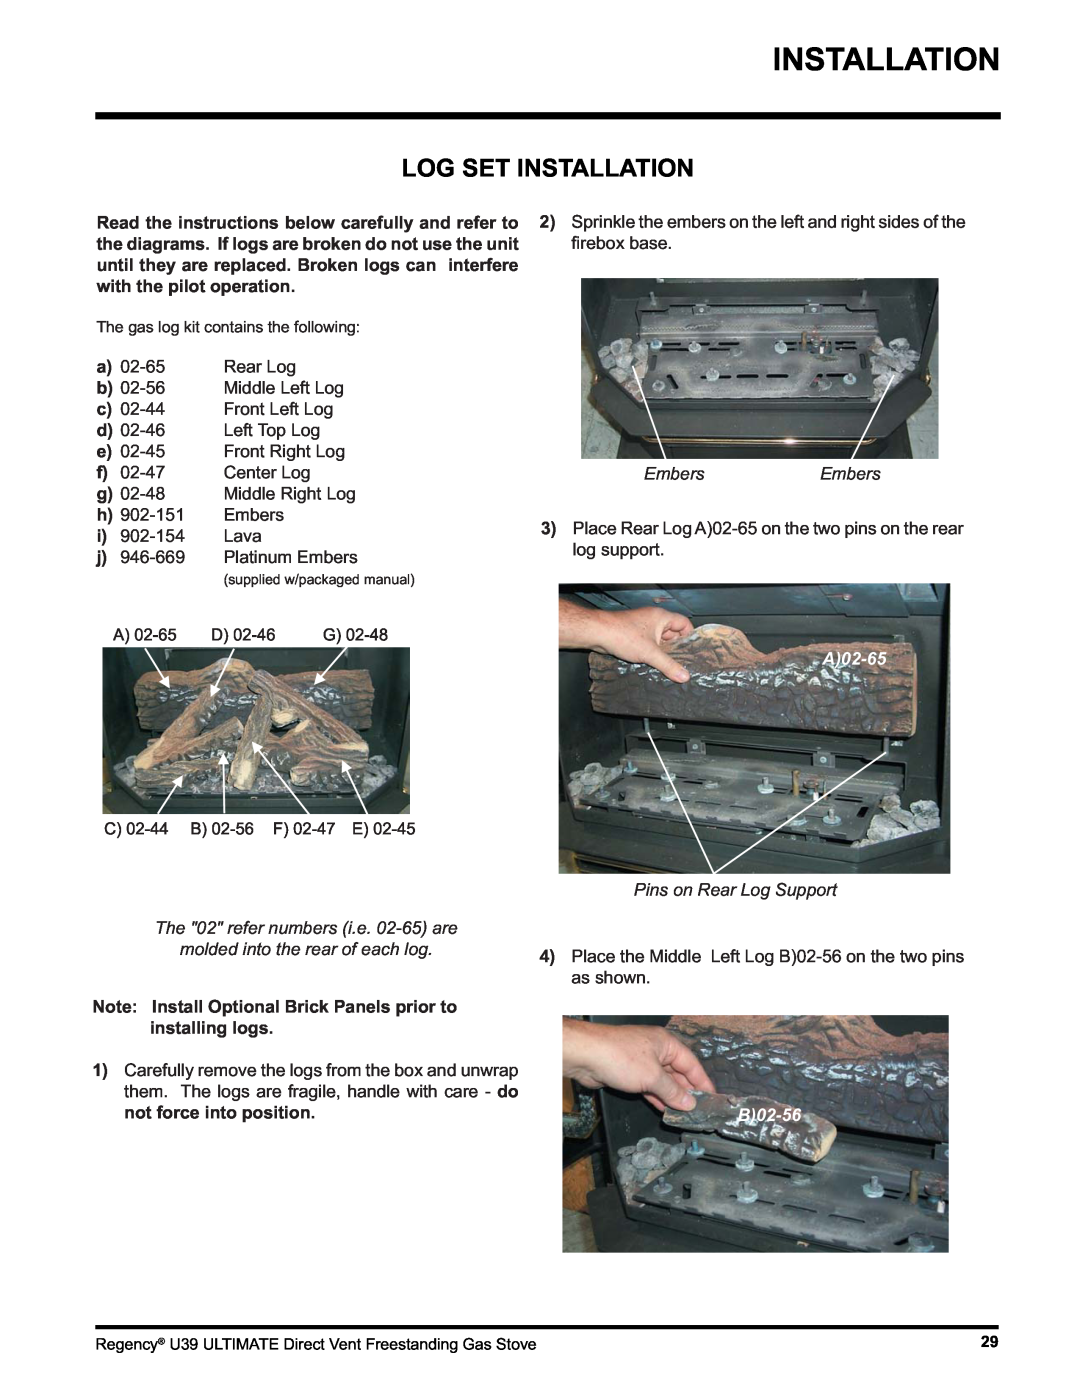 Regency U39-NG1 Log Set Installation, The 02 refer numbers i.e. 02-65are, molded into the rear of each log, A02-65 